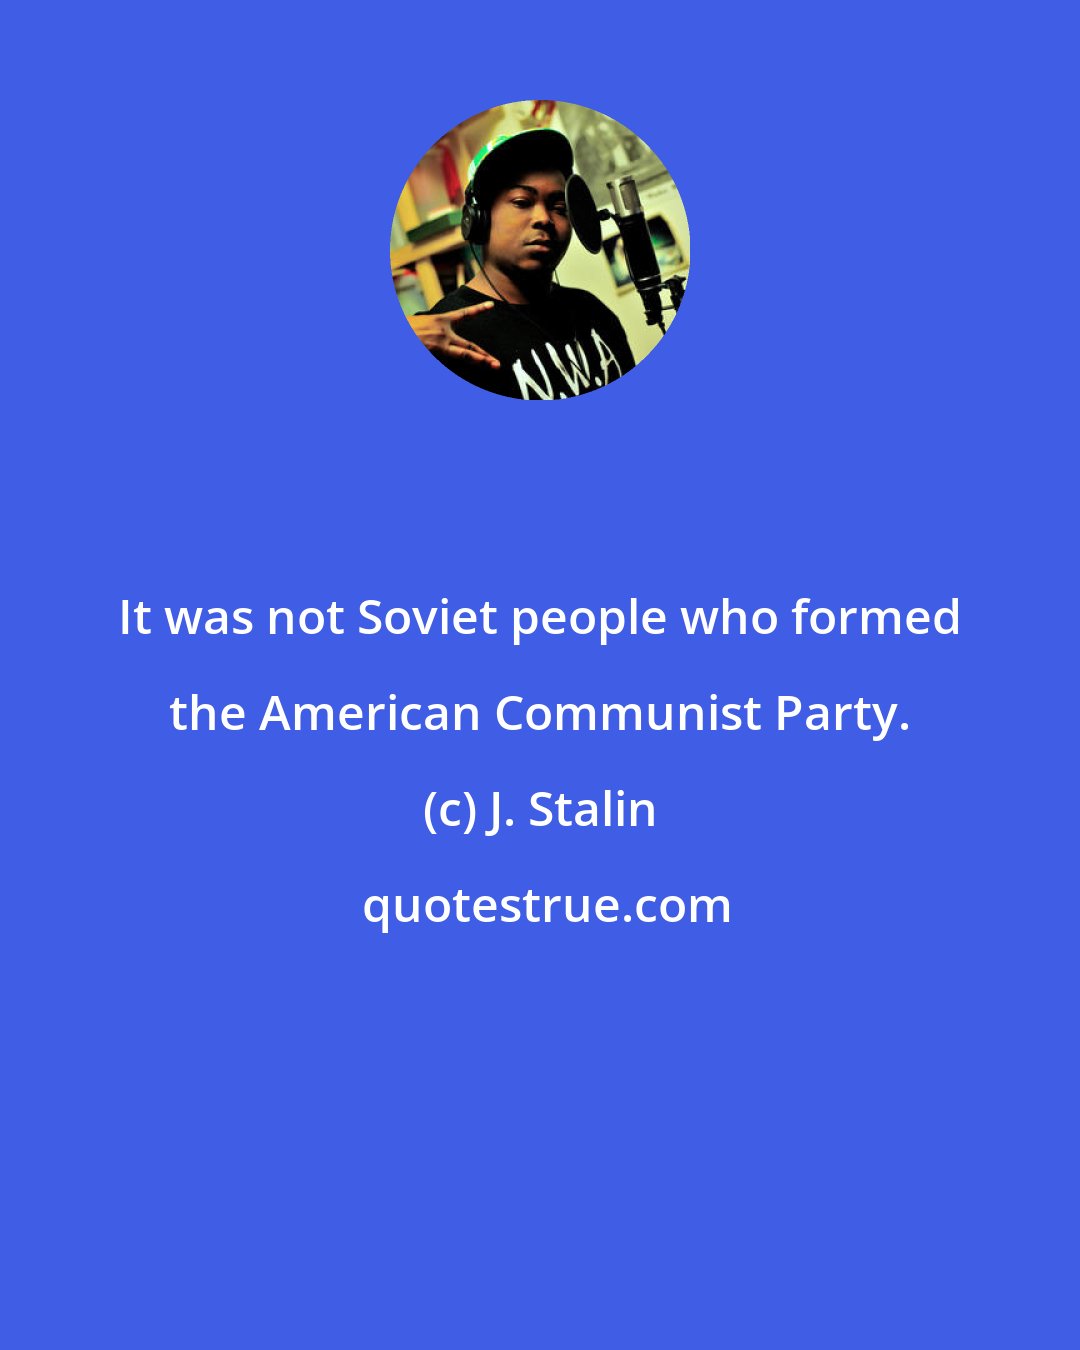 J. Stalin: It was not Soviet people who formed the American Communist Party.